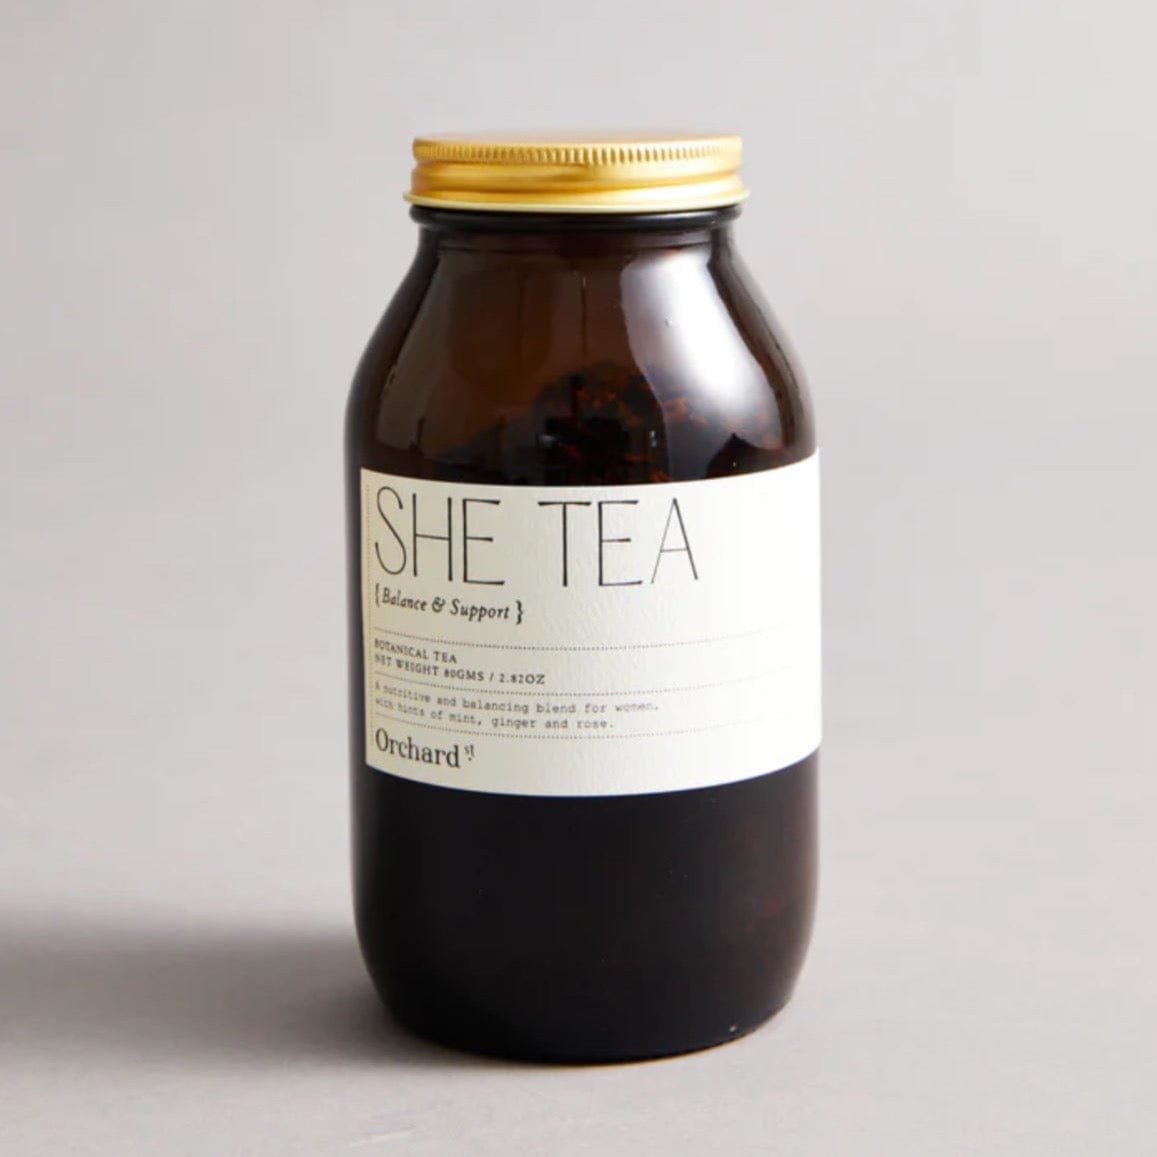 She Tea by Orchard Street